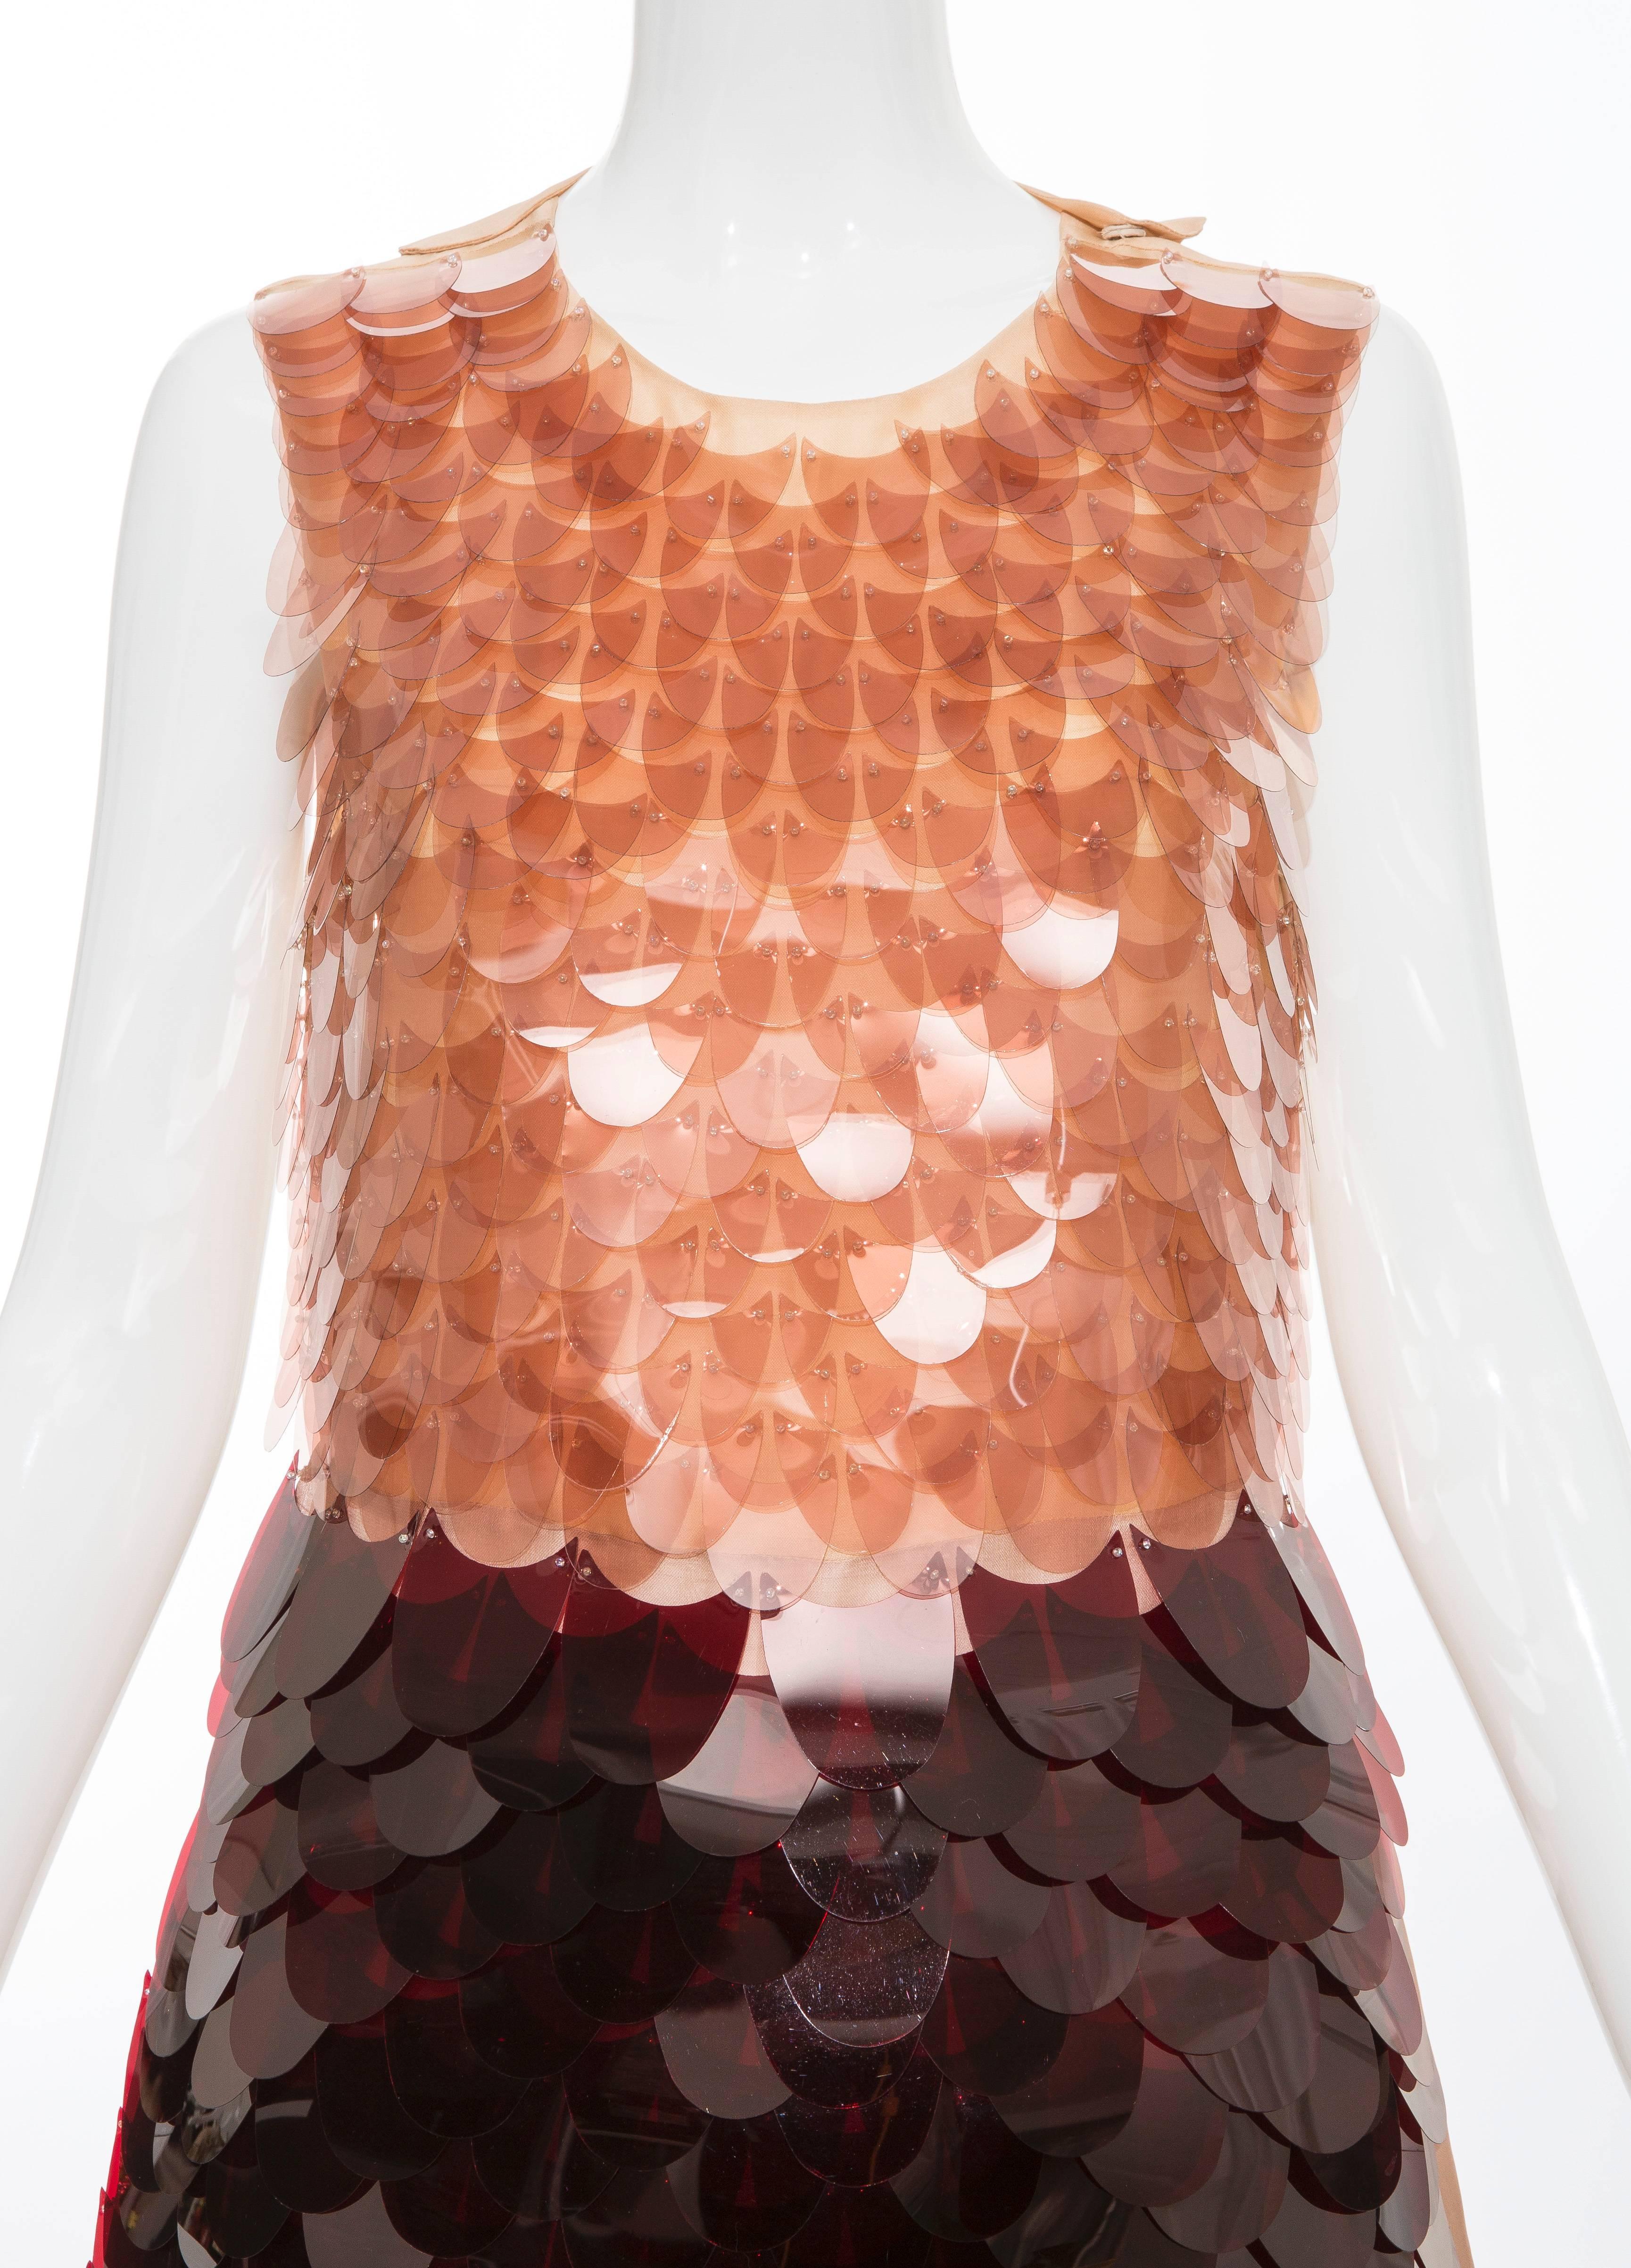 Brown Prada Sleeveless Dress With Large Paillettes And Scoop Back, Fall 2011